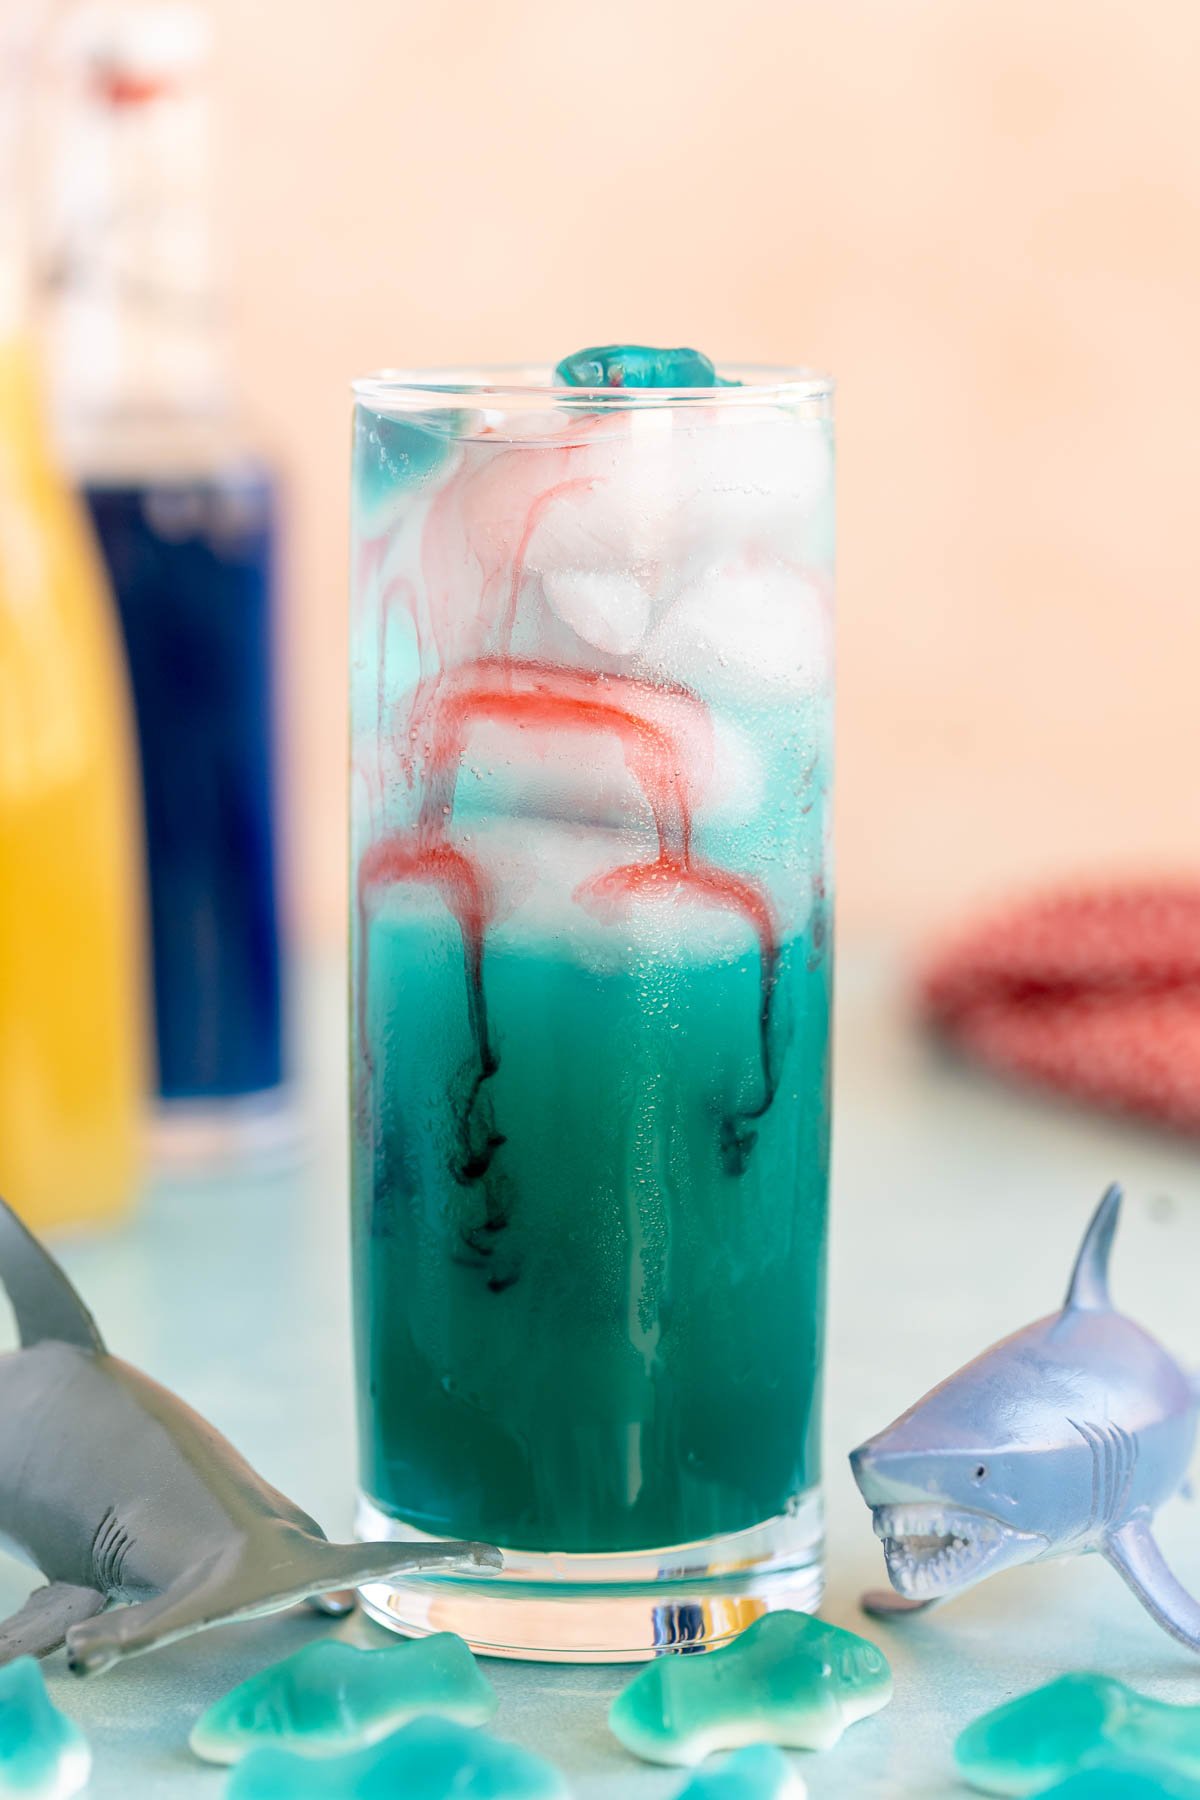 Shark attack drink in a glass